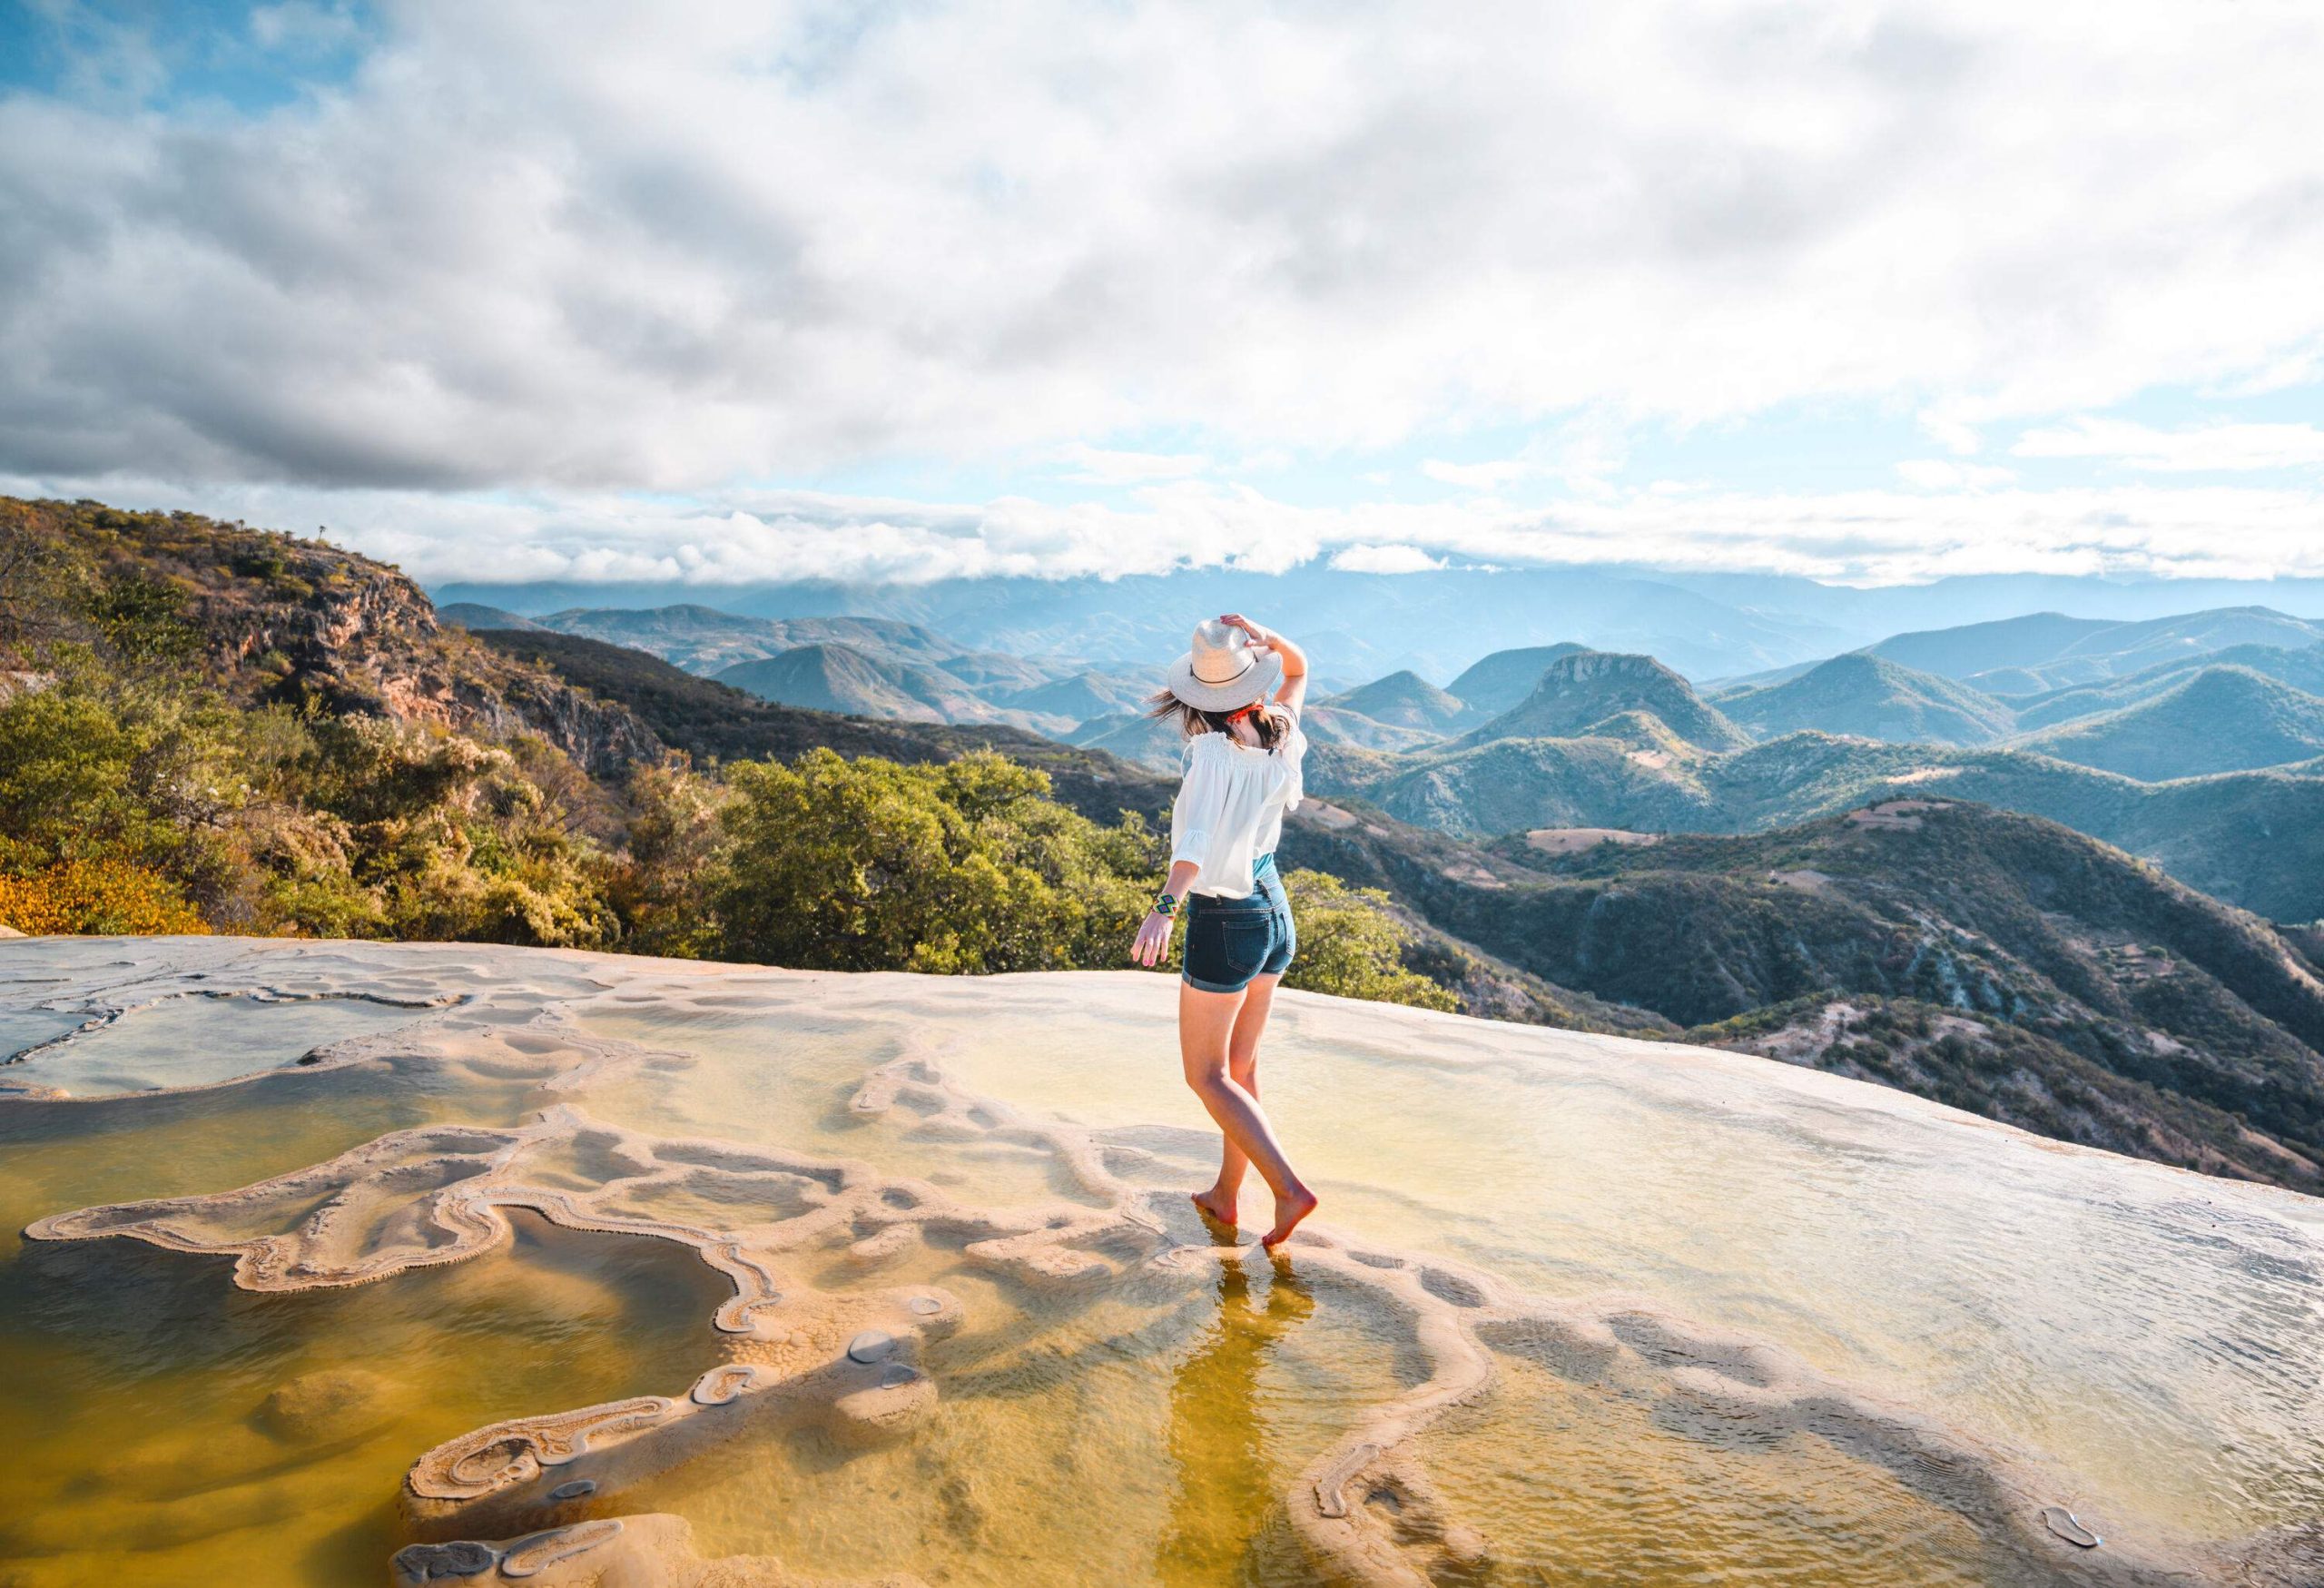 A woman stands on the natural rock formations where water trickles over the cliff overlooking the hills and cloud-capped mountains.